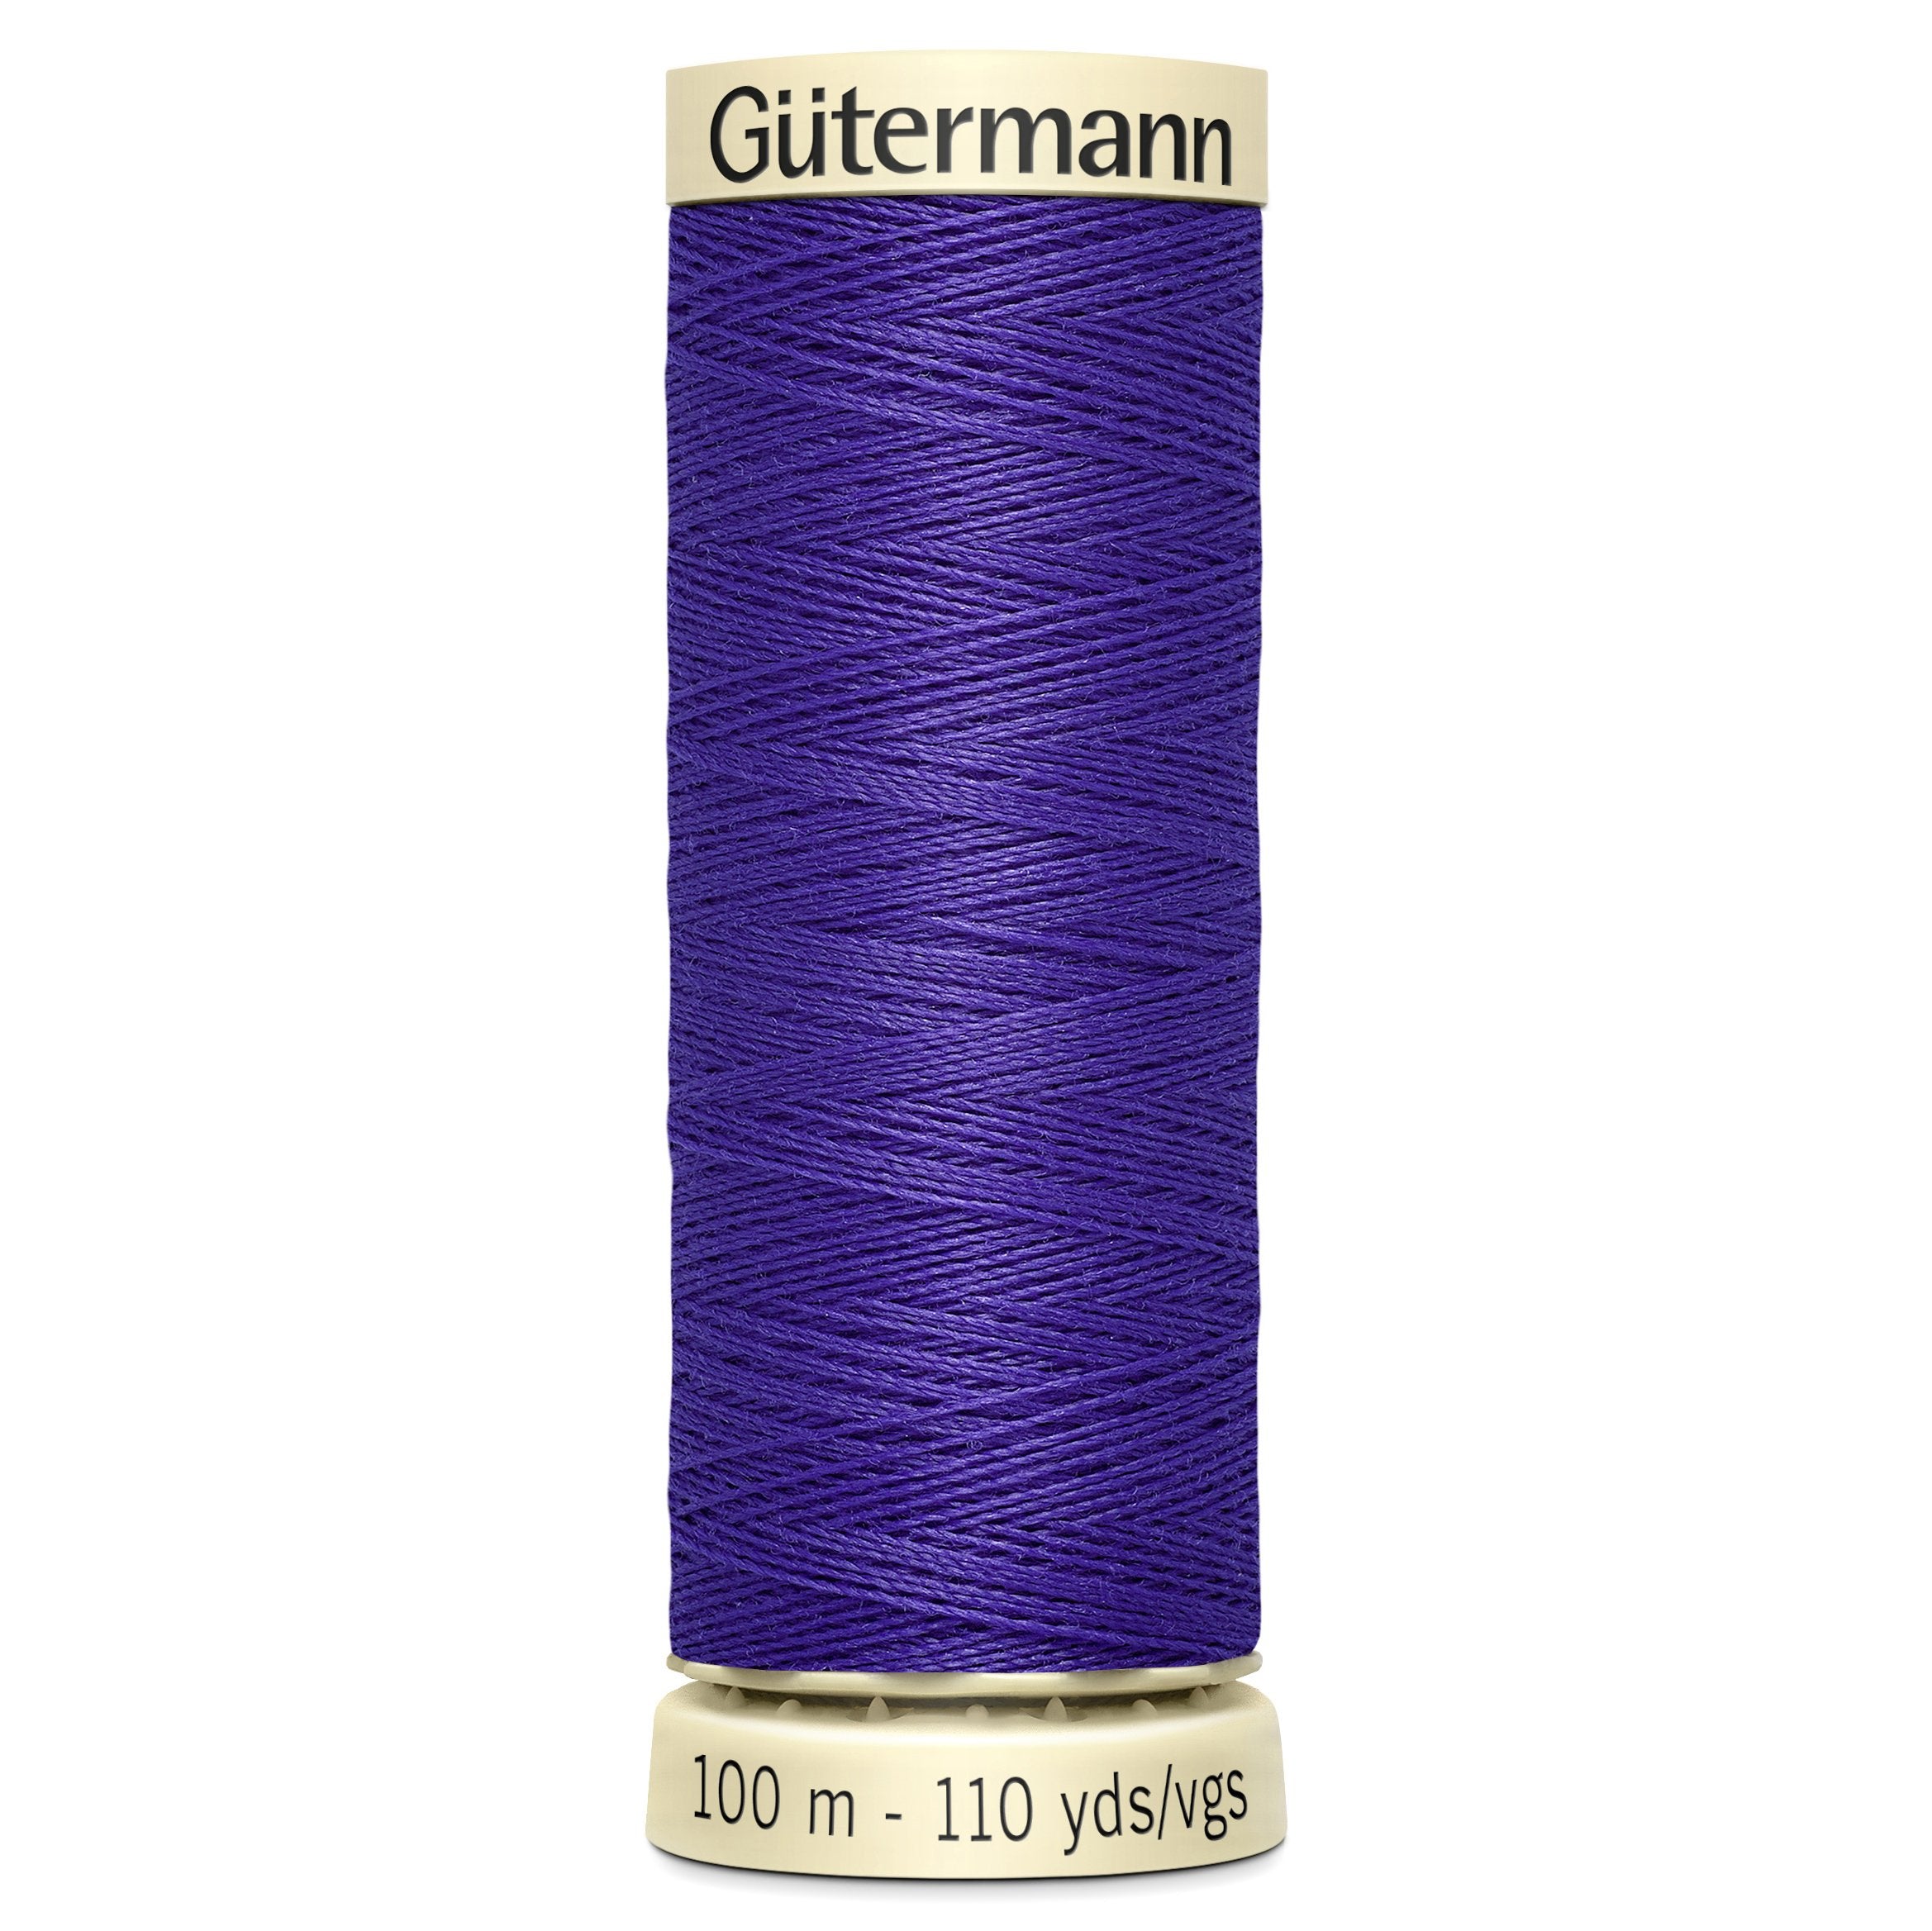 Gutermann Sew All Thread colour 810 Purple from Jaycotts Sewing Supplies